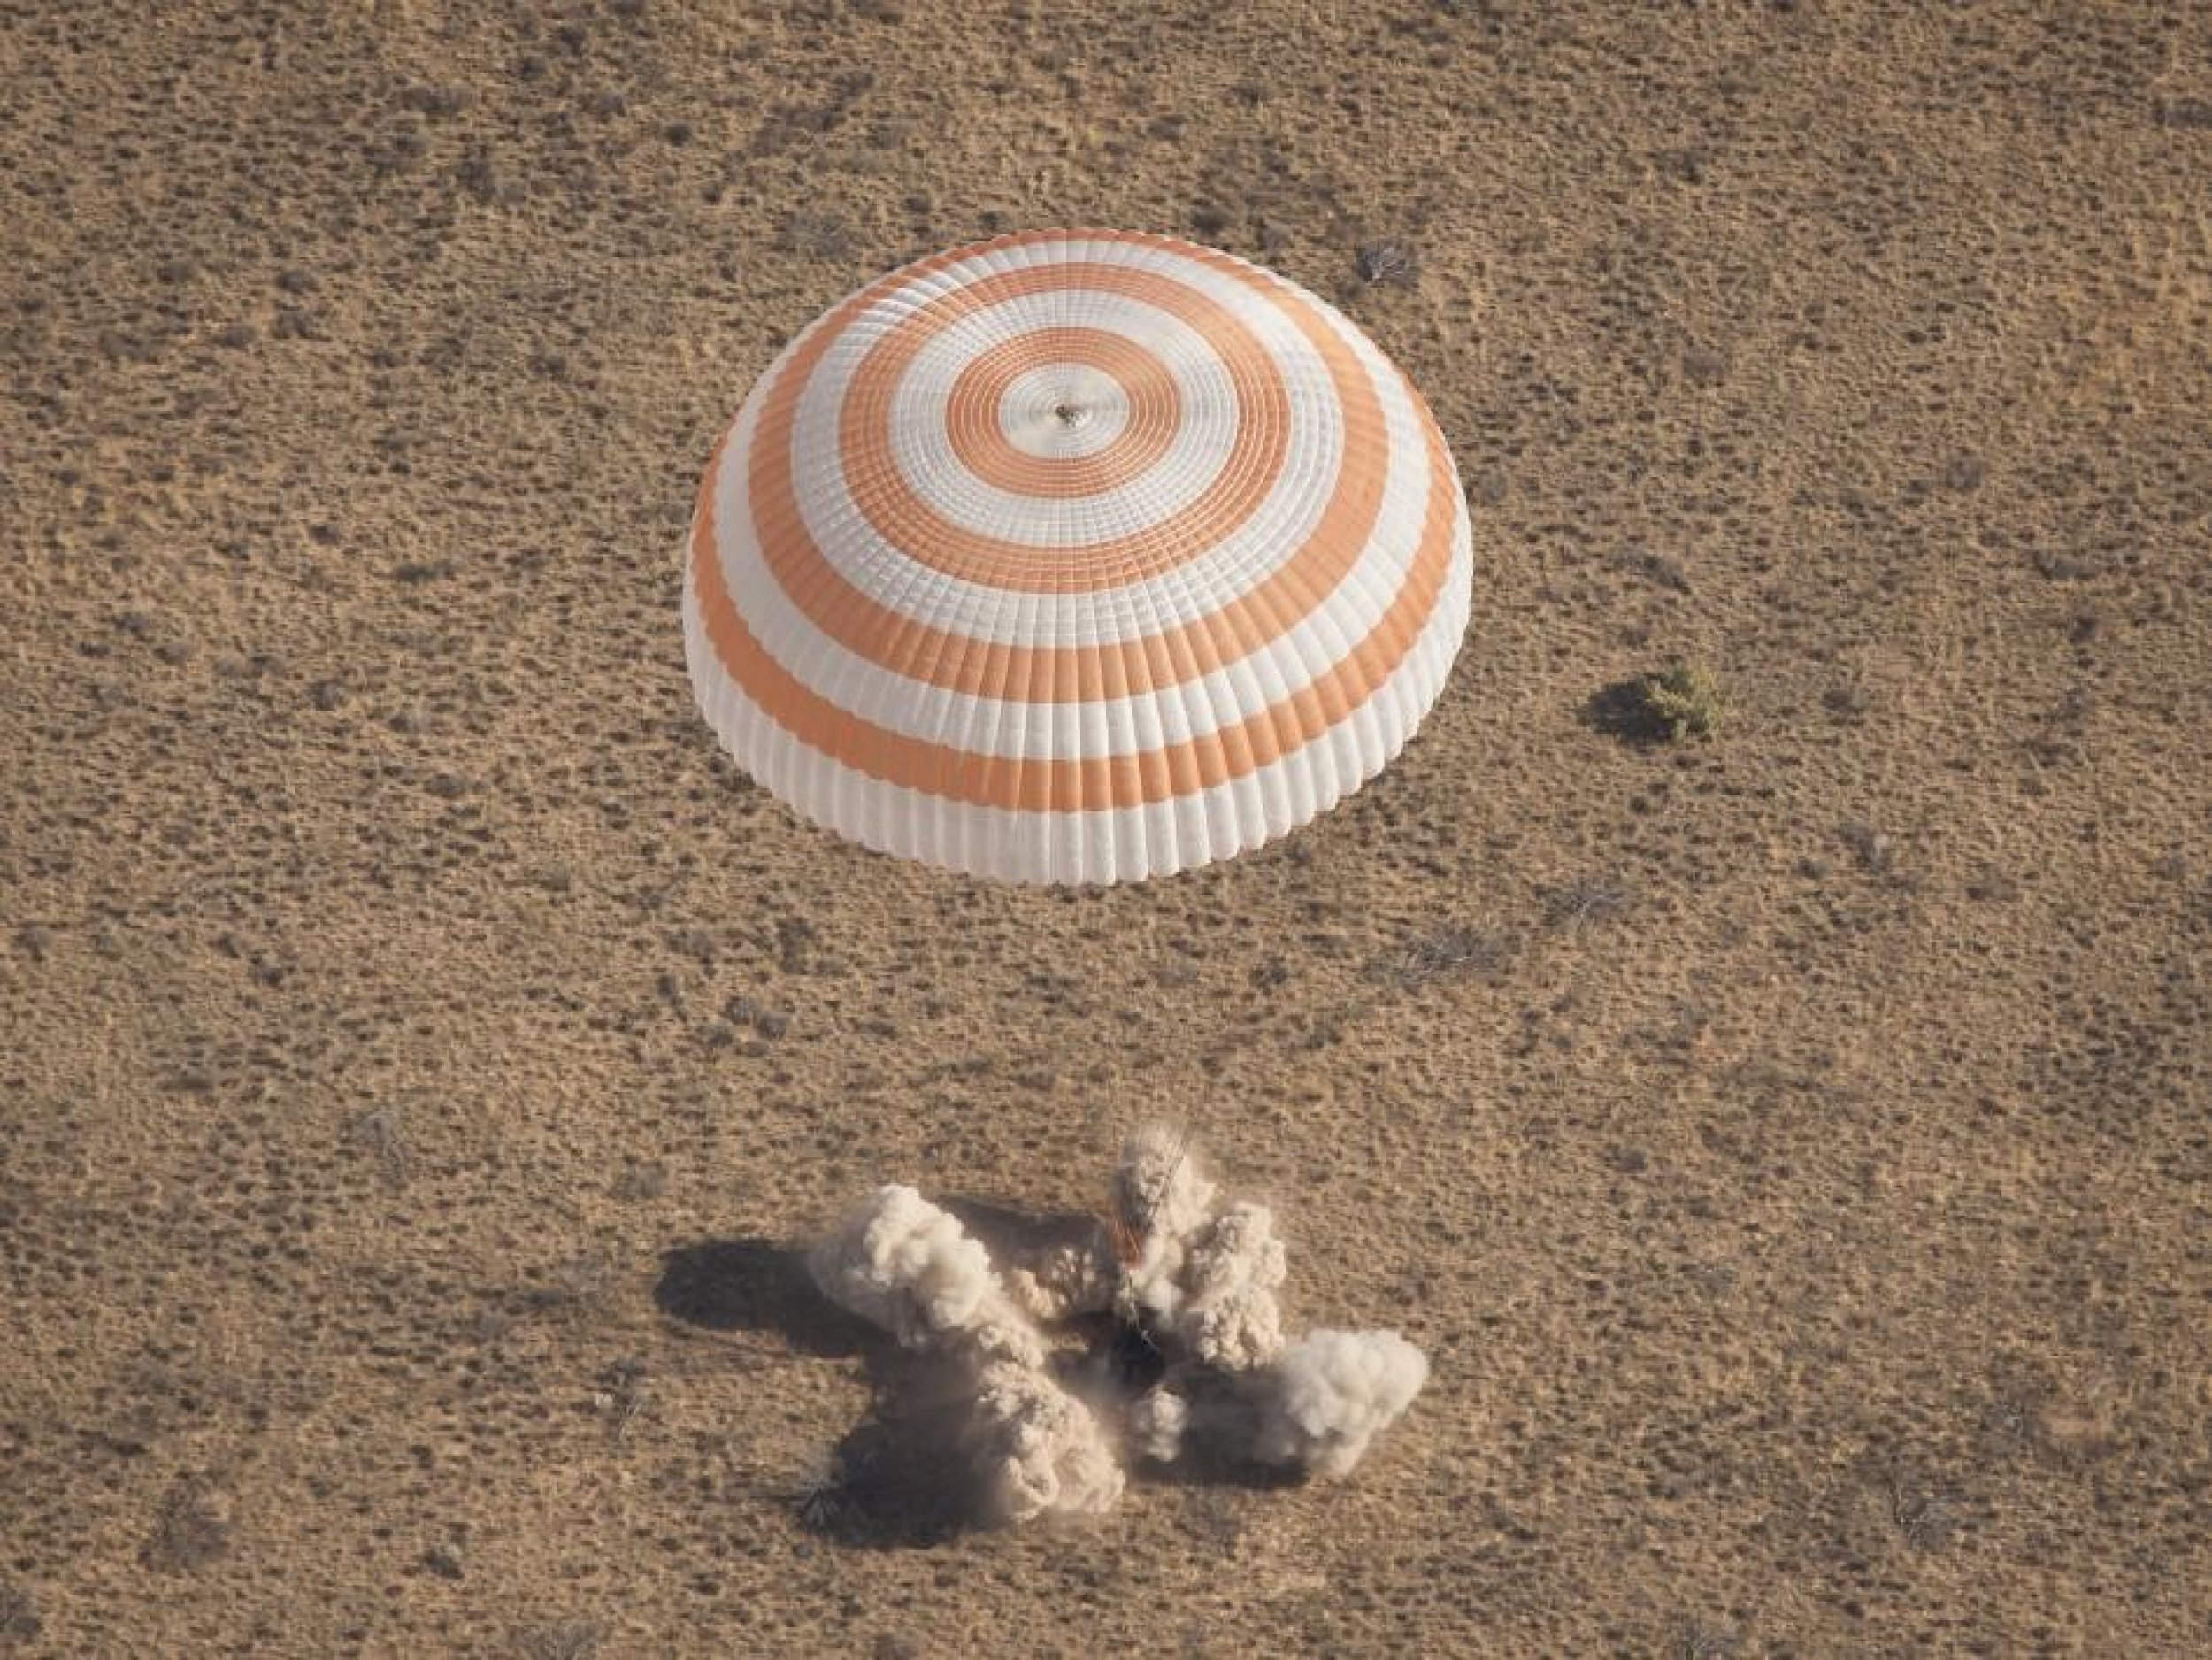 Expedition 28 Lands